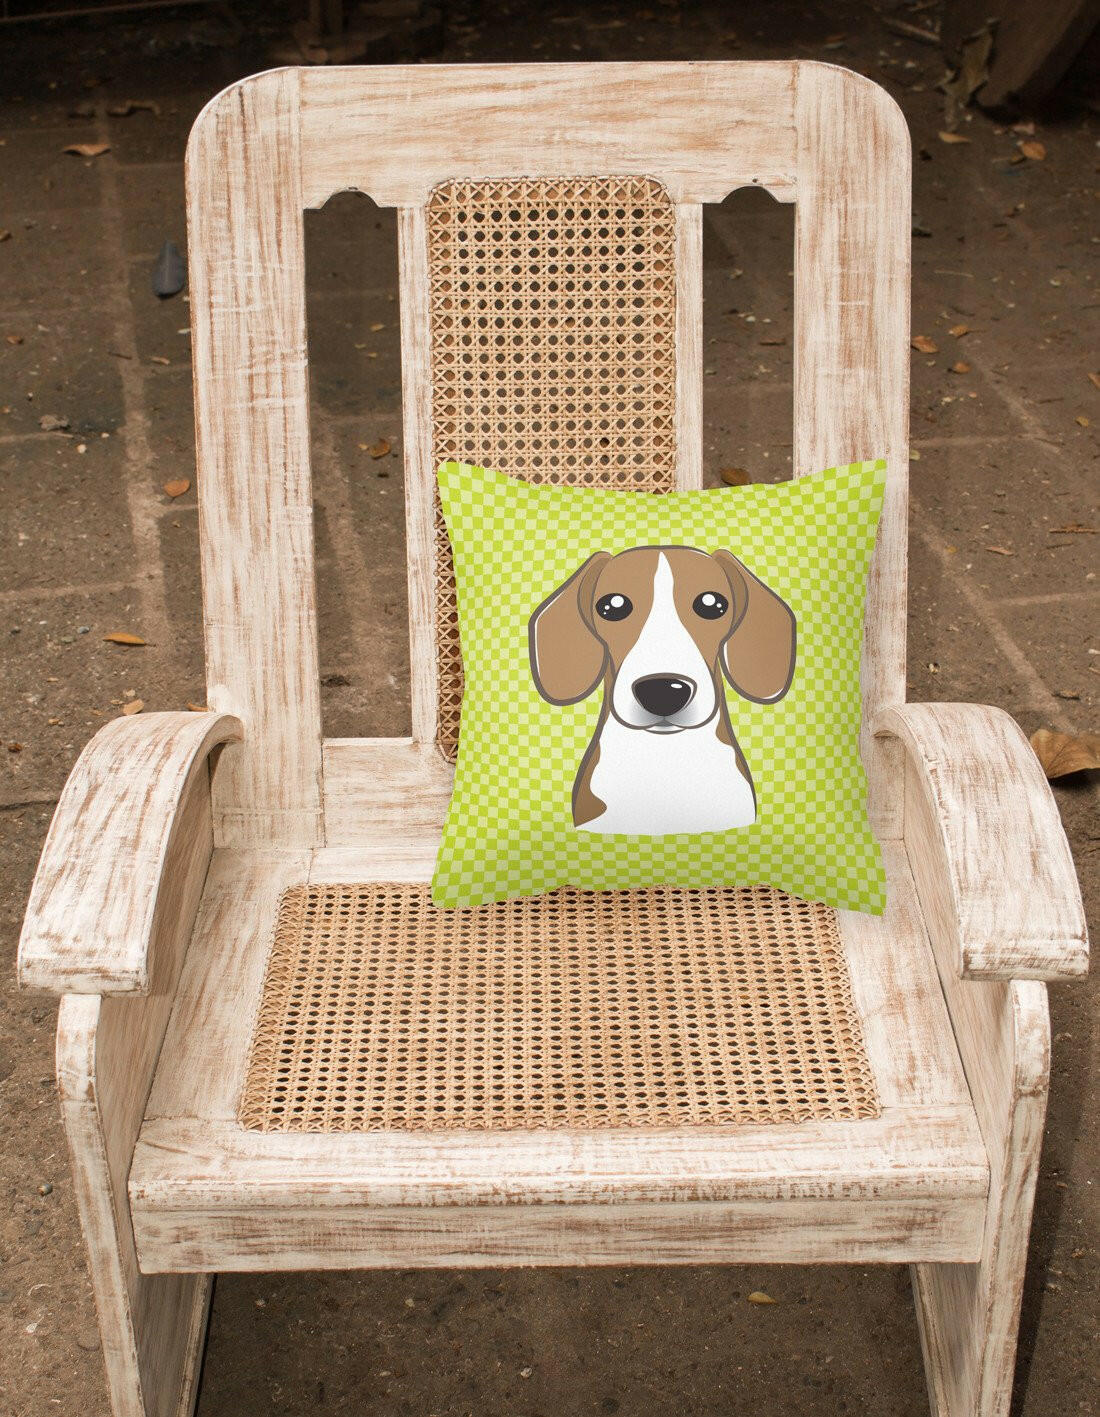 Checkerboard Lime Green Beagle Canvas Fabric Decorative Pillow BB1301PW1414 - the-store.com